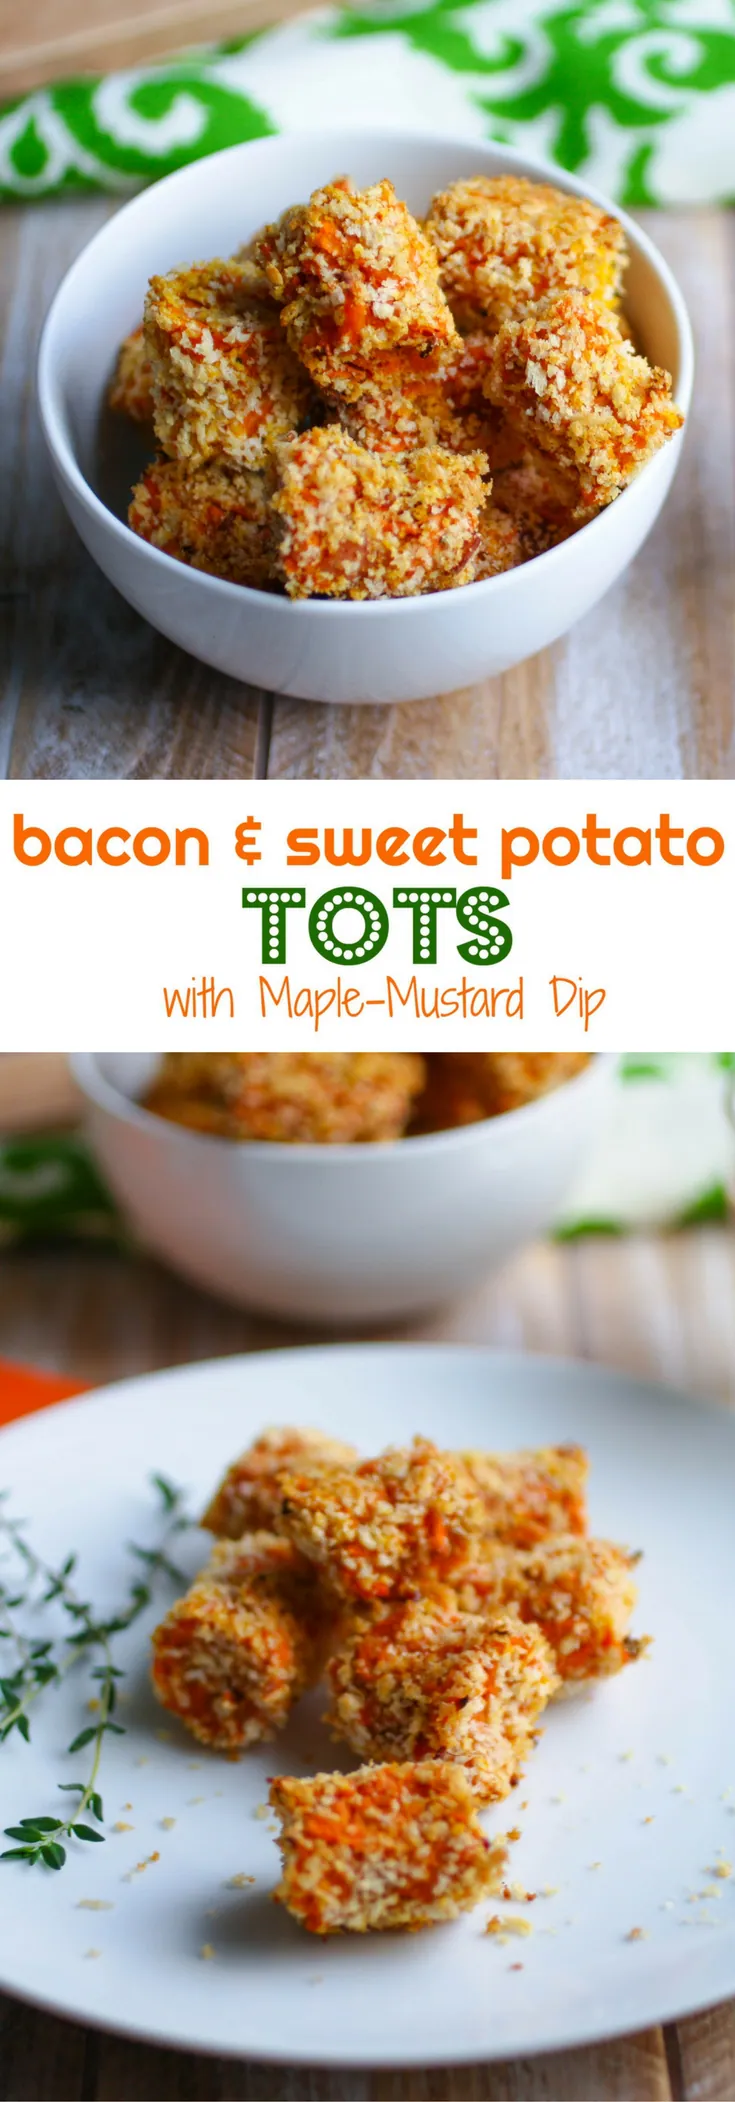 Bacon-Sweet Potato Tots with Maple Mustard Dip make a wonderful side dish, perfect for Thanksgiving! You'll love these tots as a side dish any night of the week!